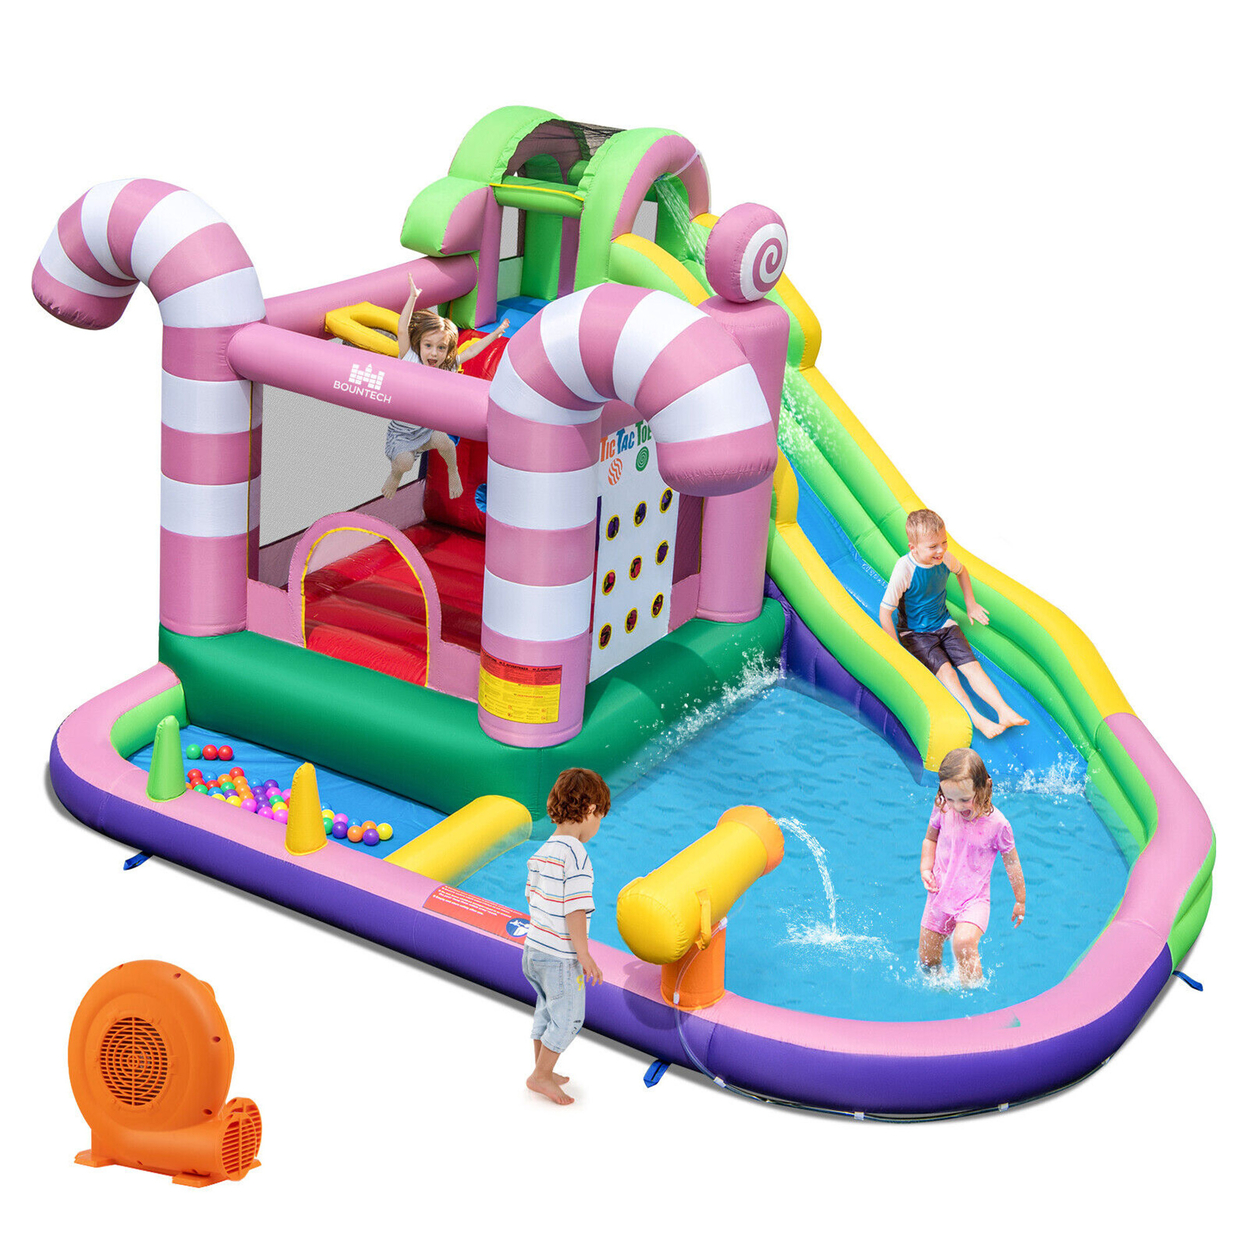 9-in-1 Inflatable Bounce House Sweet Candy Water Slide Park Pool W/ 750W Blower